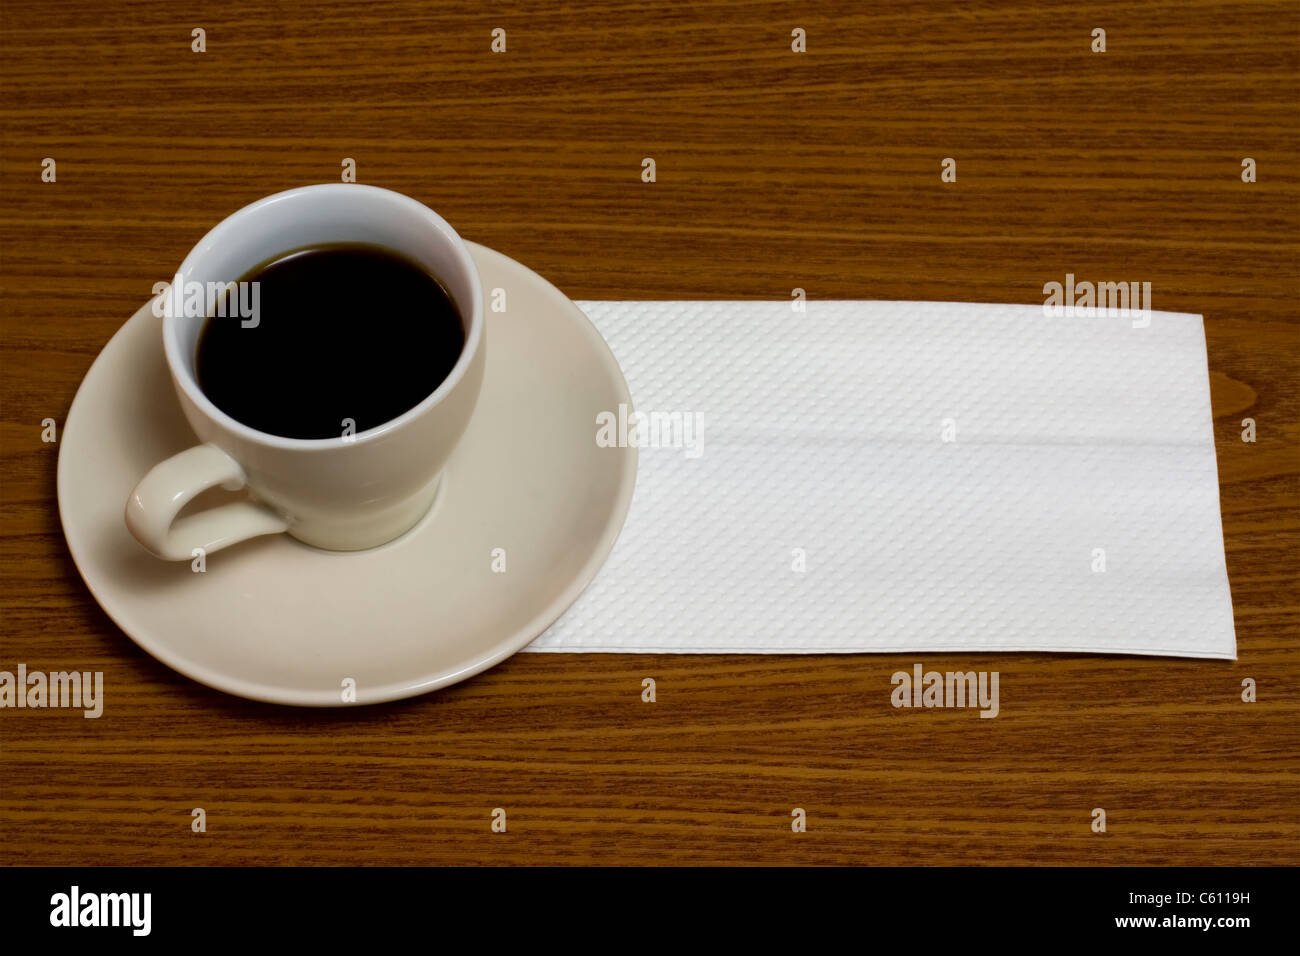 A cup of coffee with napkin on a table Stock Photo